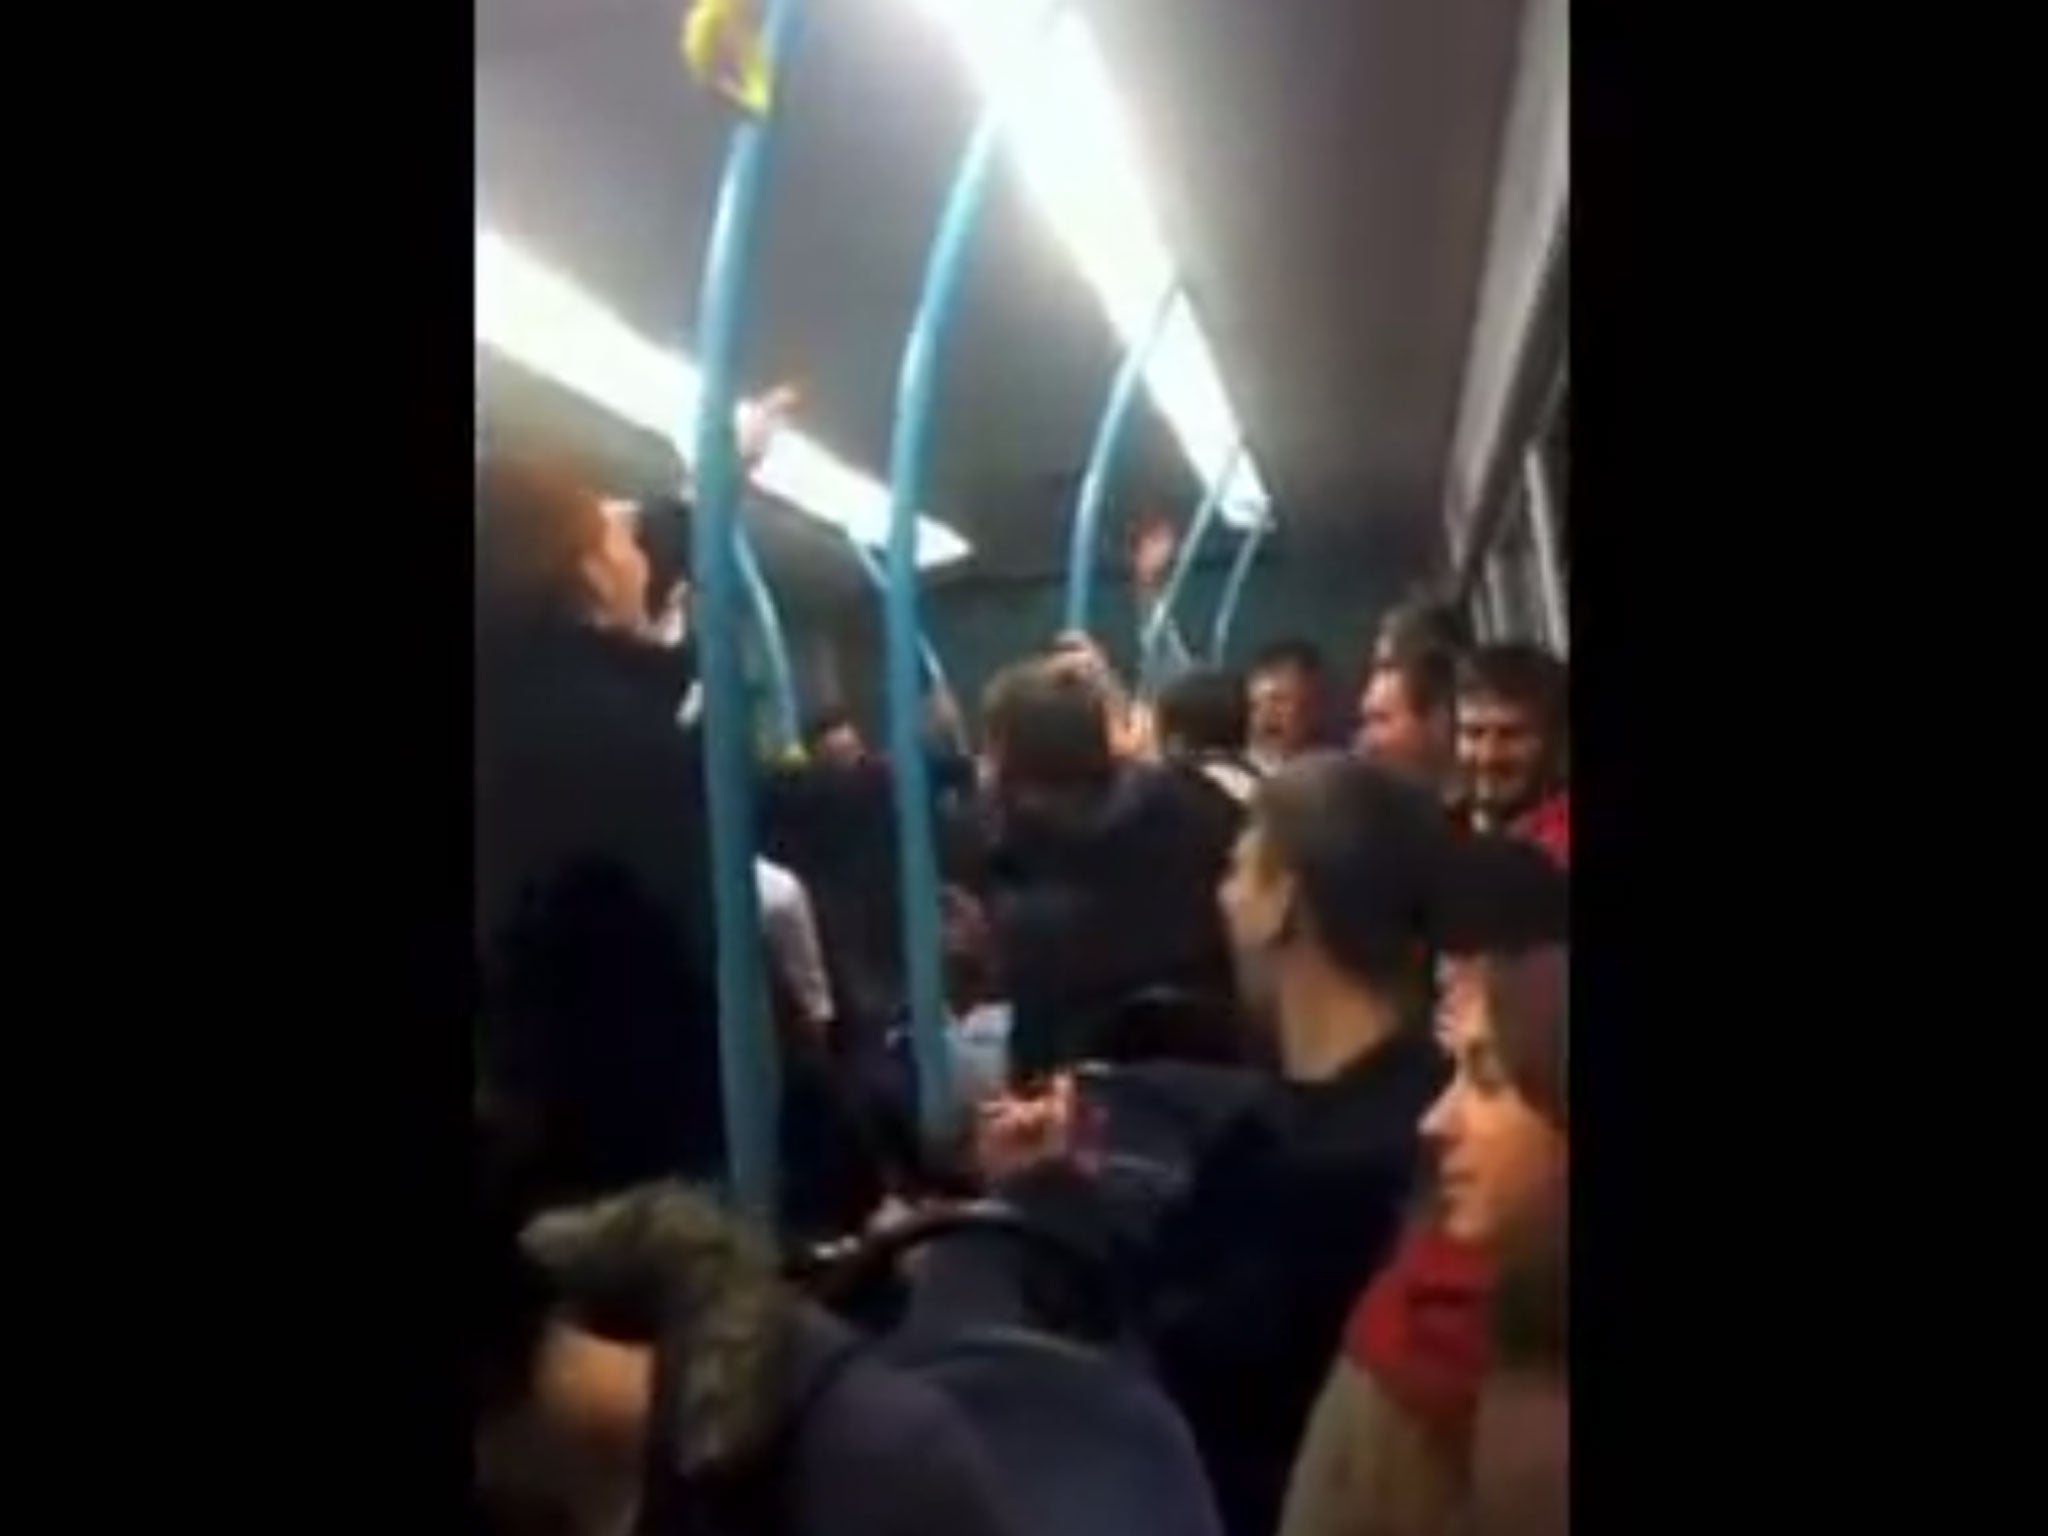 A screenshot of the packed bus during the chanting from the video posted online